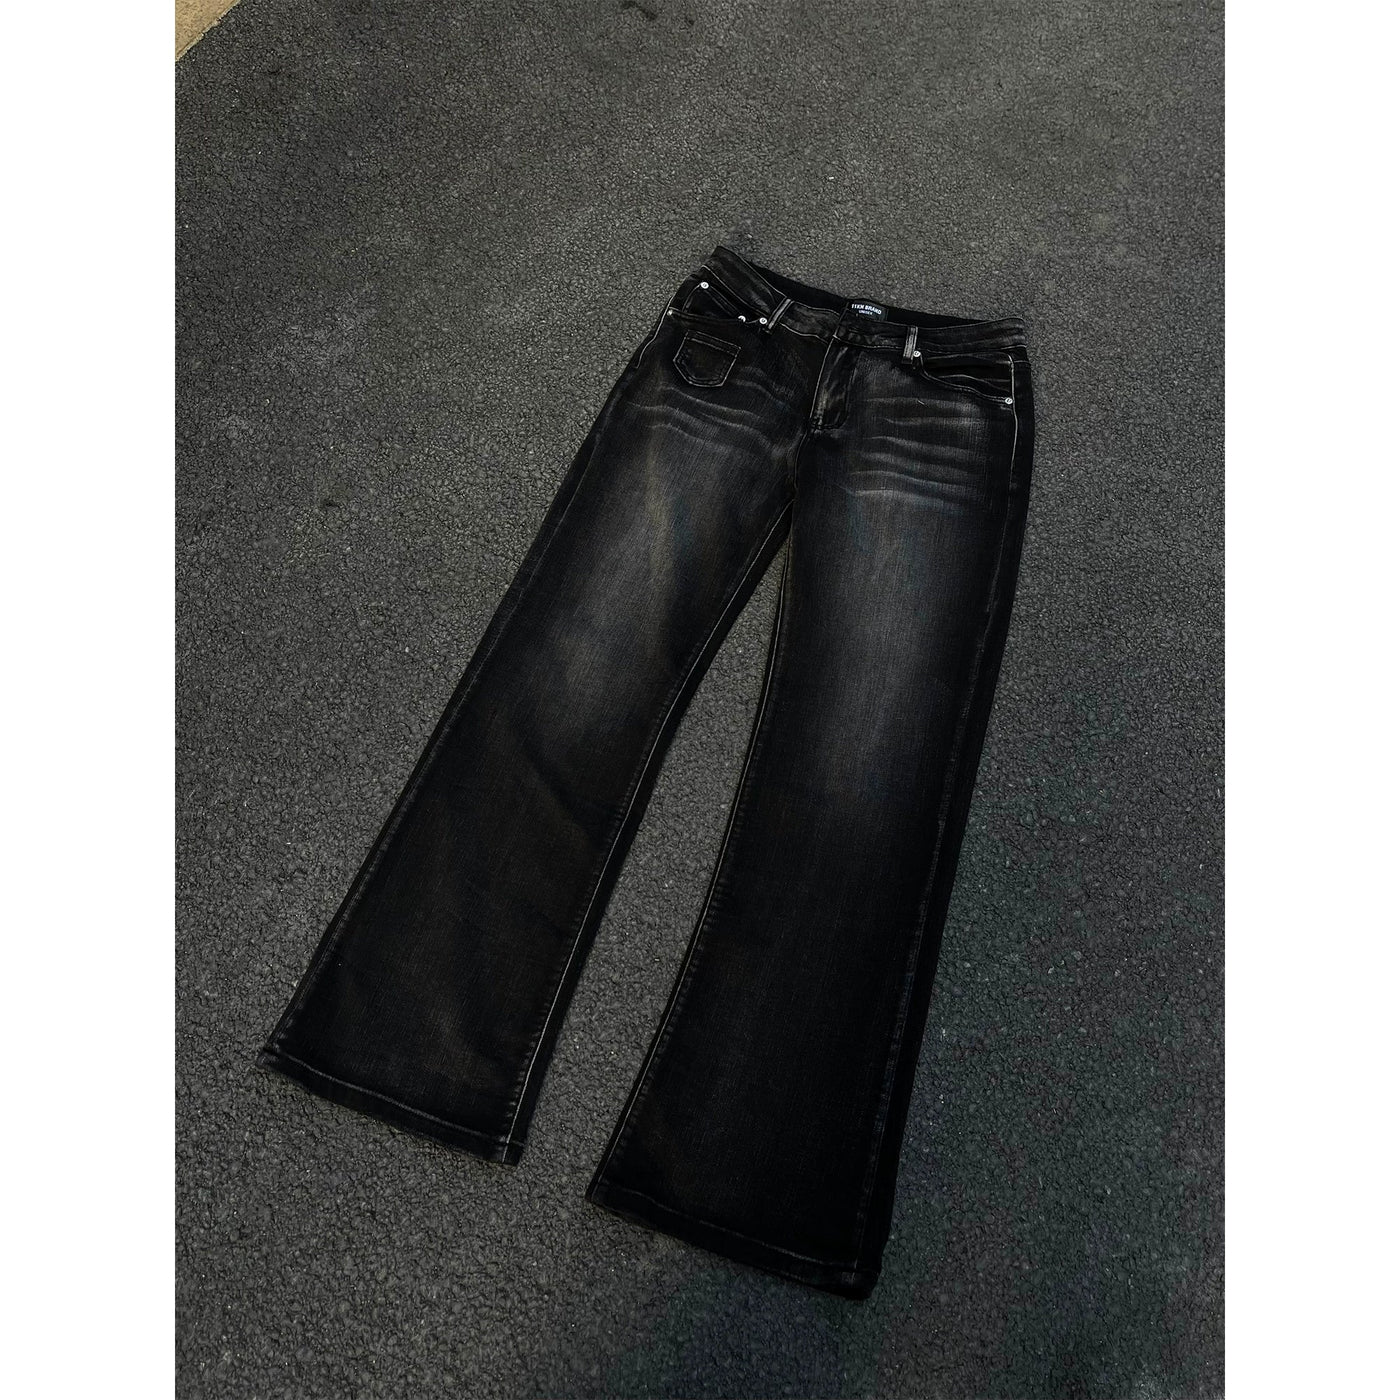 Washed Effect Flared Jeans Korean Street Fashion Jeans By MaxDstr Shop Online at OH Vault